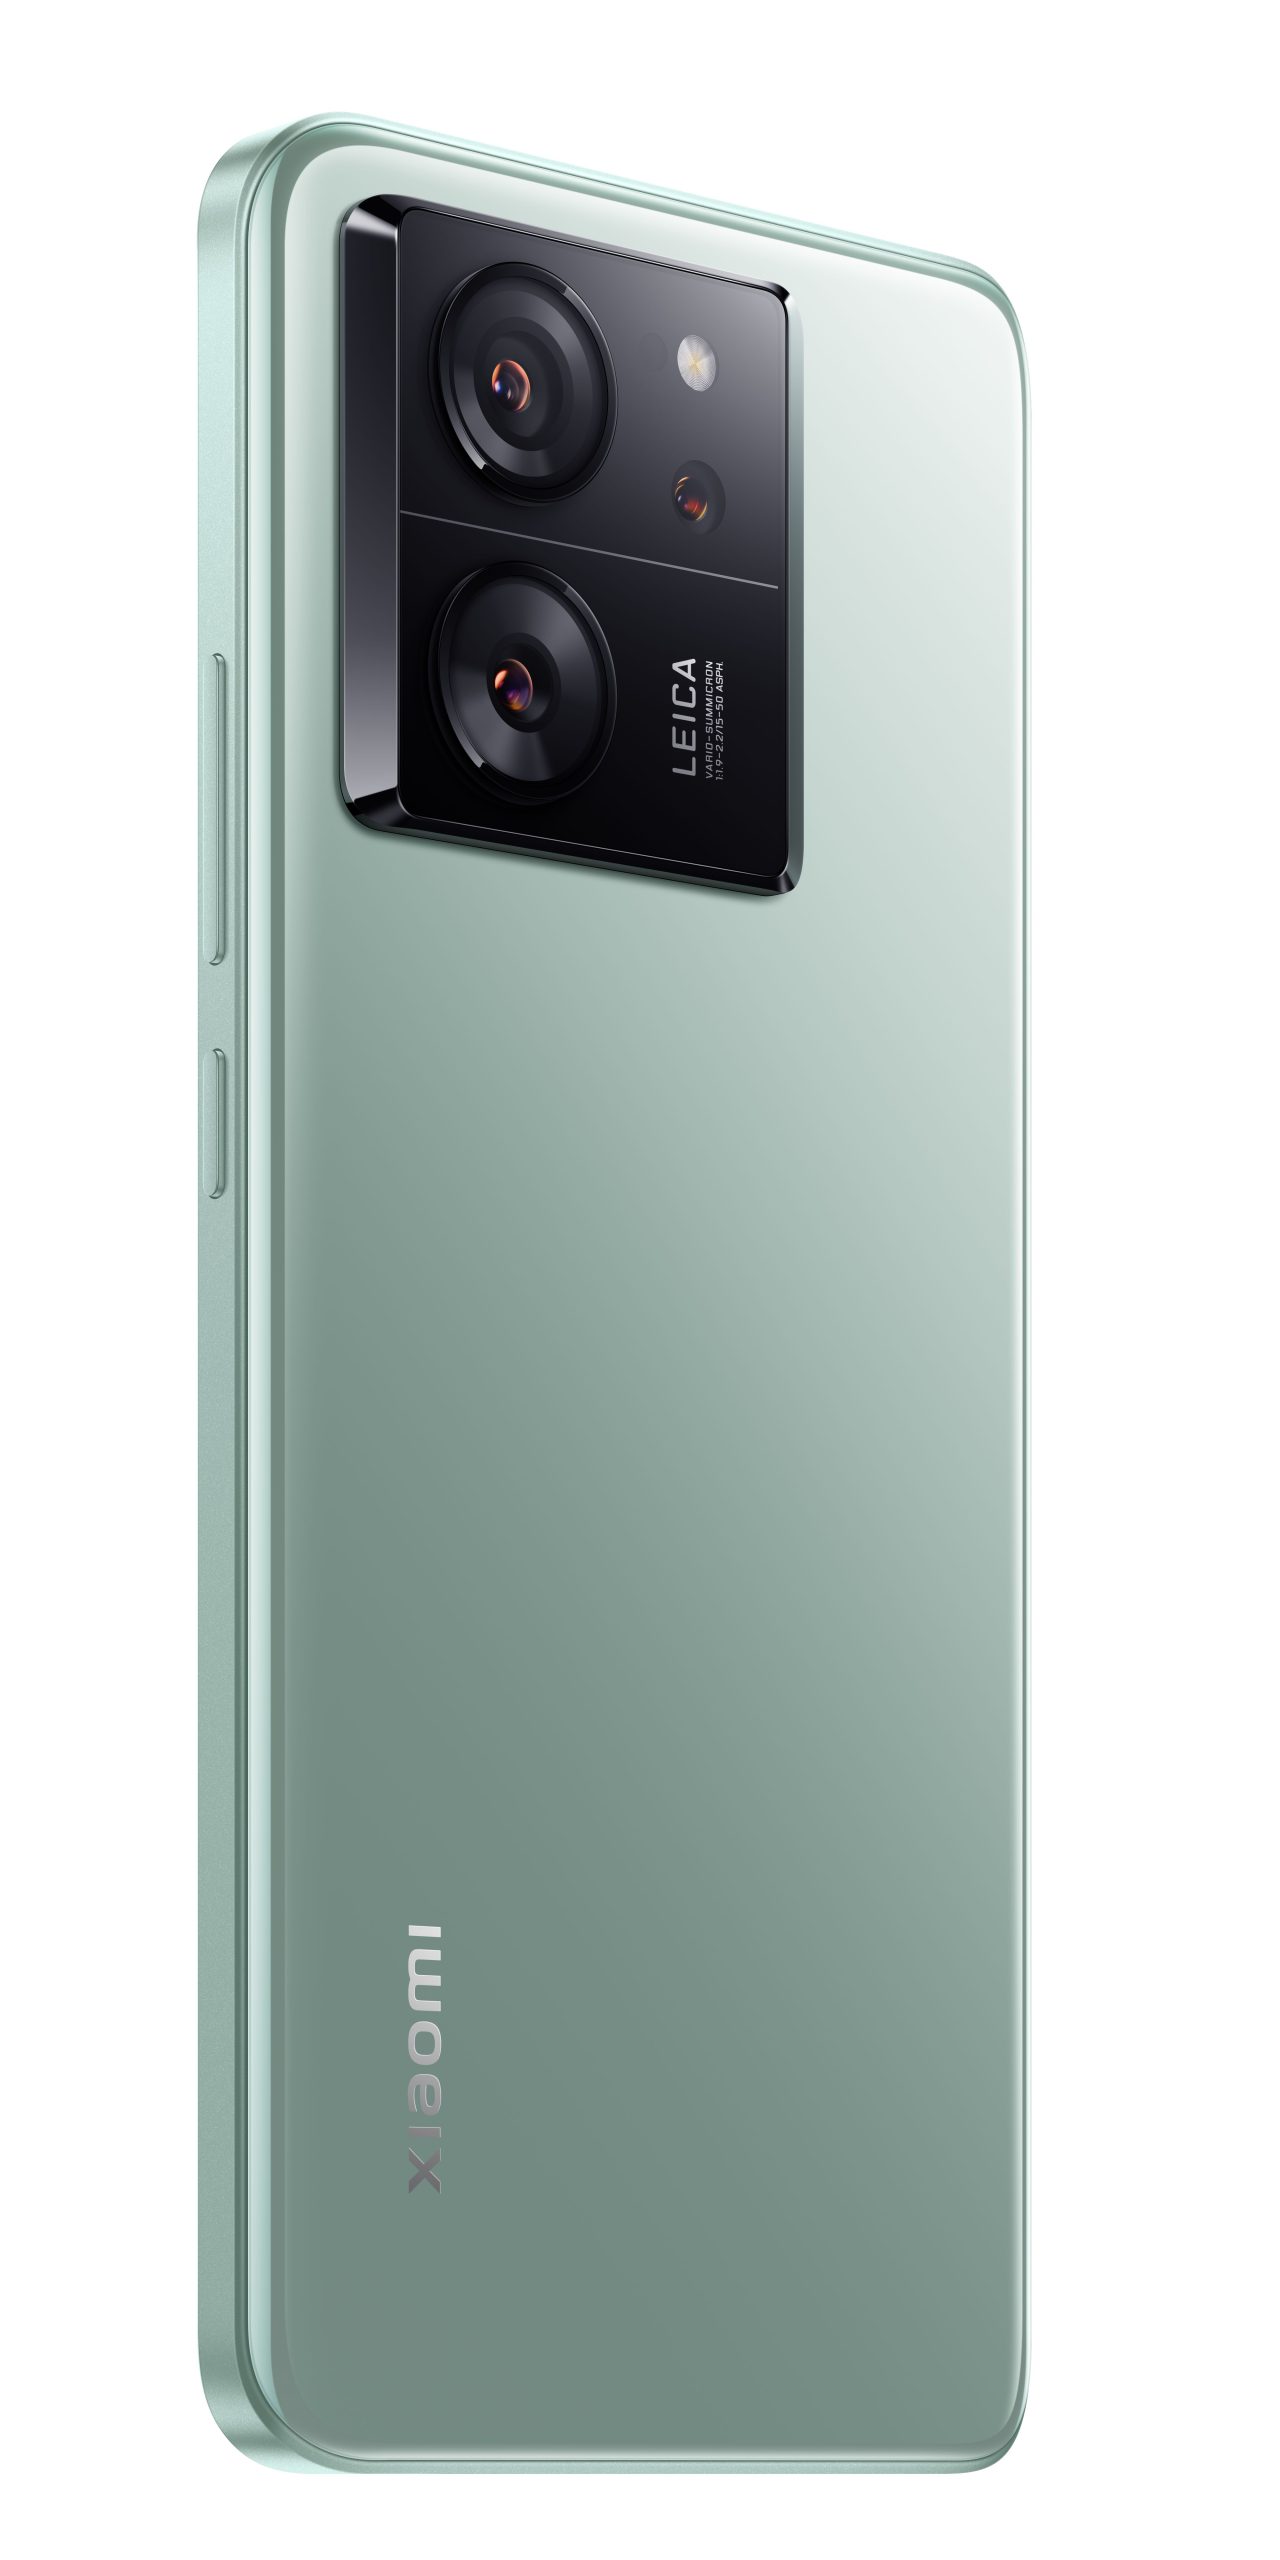 Xiaomi 13T Pro now official in the Philippines: 4nm Dimensity 9200+ chip,  up to 1TB storage, Leica cameras, starts at PHP 37,999!